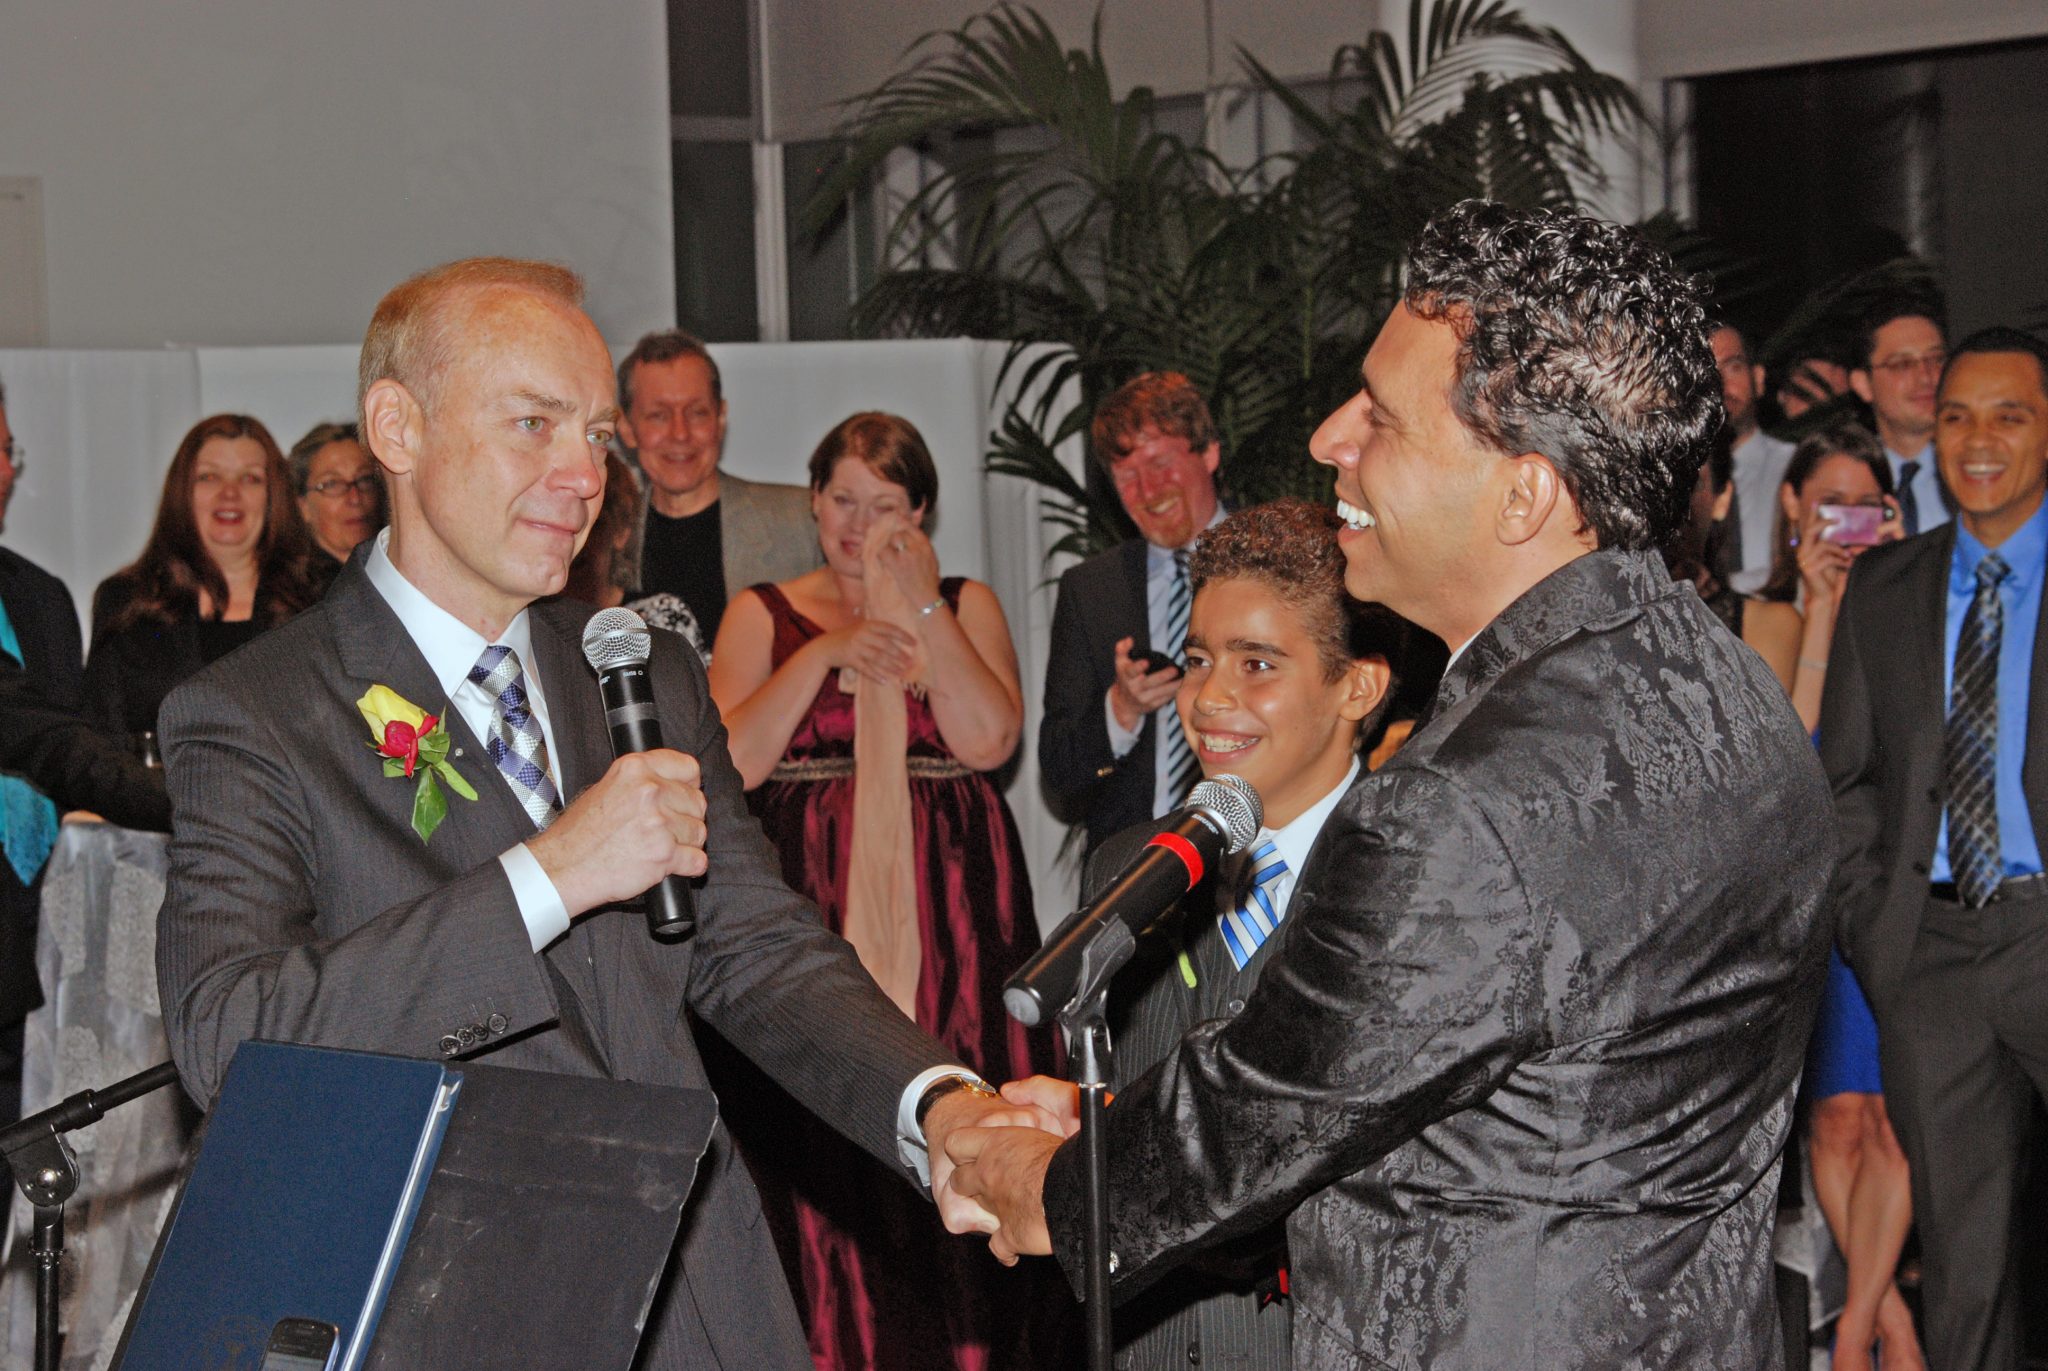 David Kenney (left) and Ben Suazo's wedding, August 1, 2012. Their son Alexander (center) was their ring bearer.